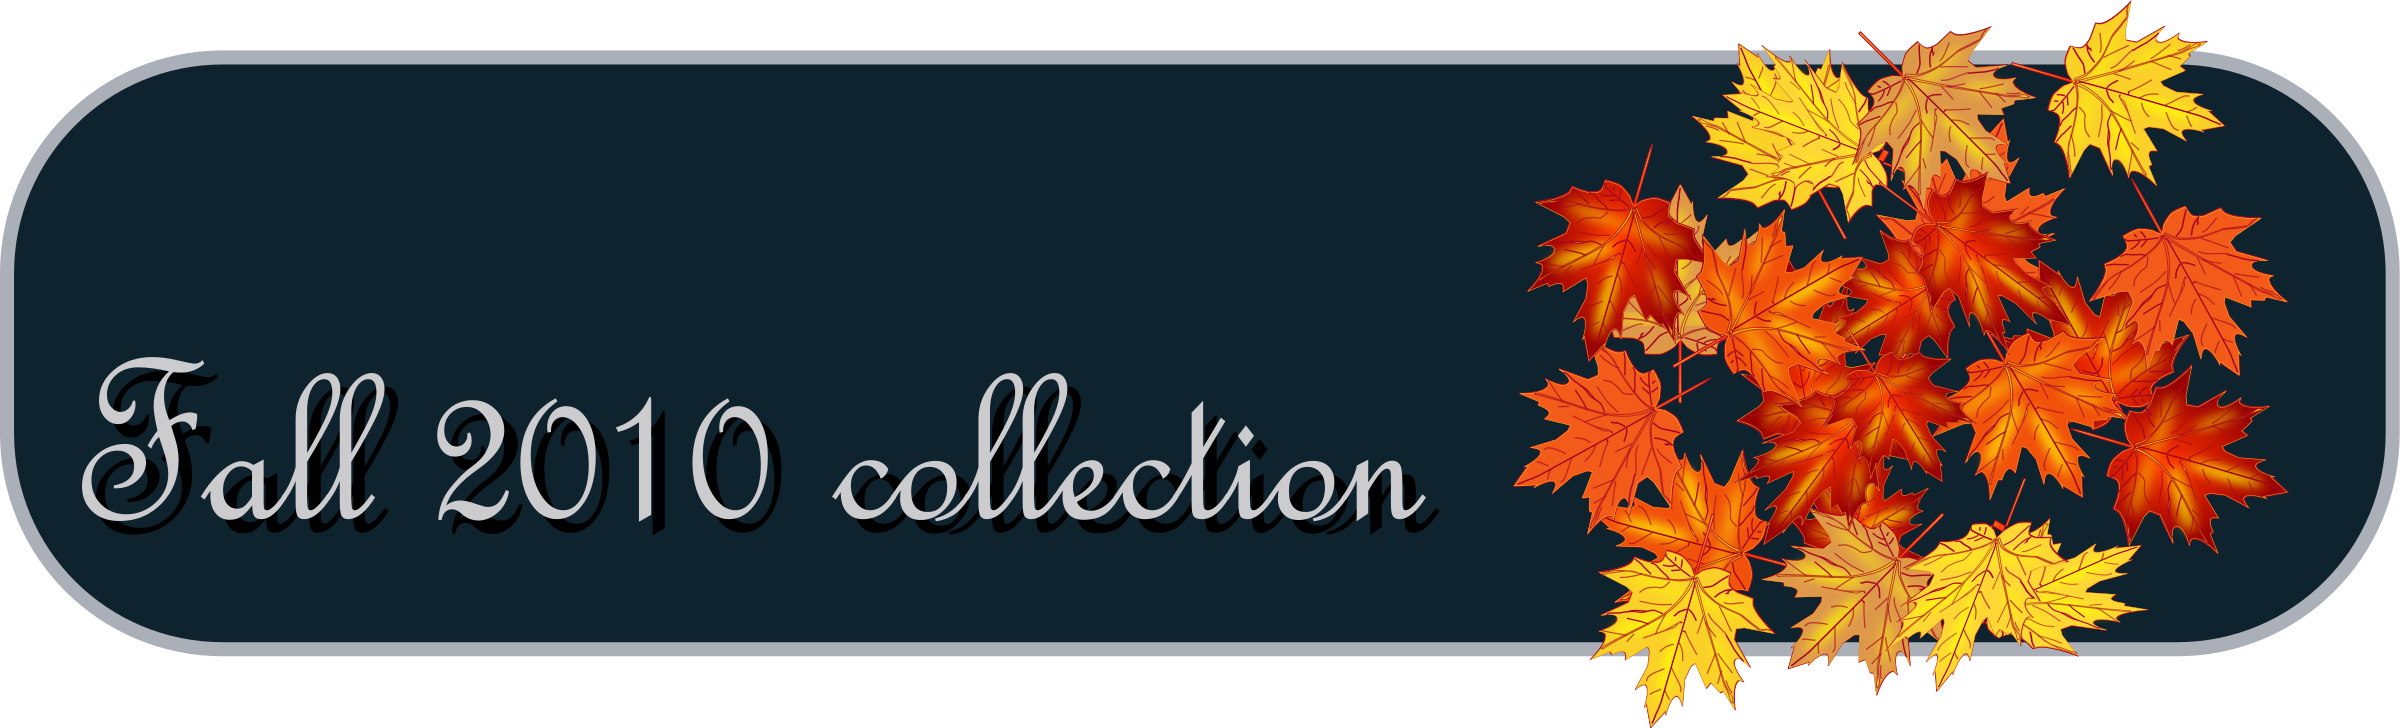 Кнопка осень. Autumn buttons. Autumn button game. Fall collection